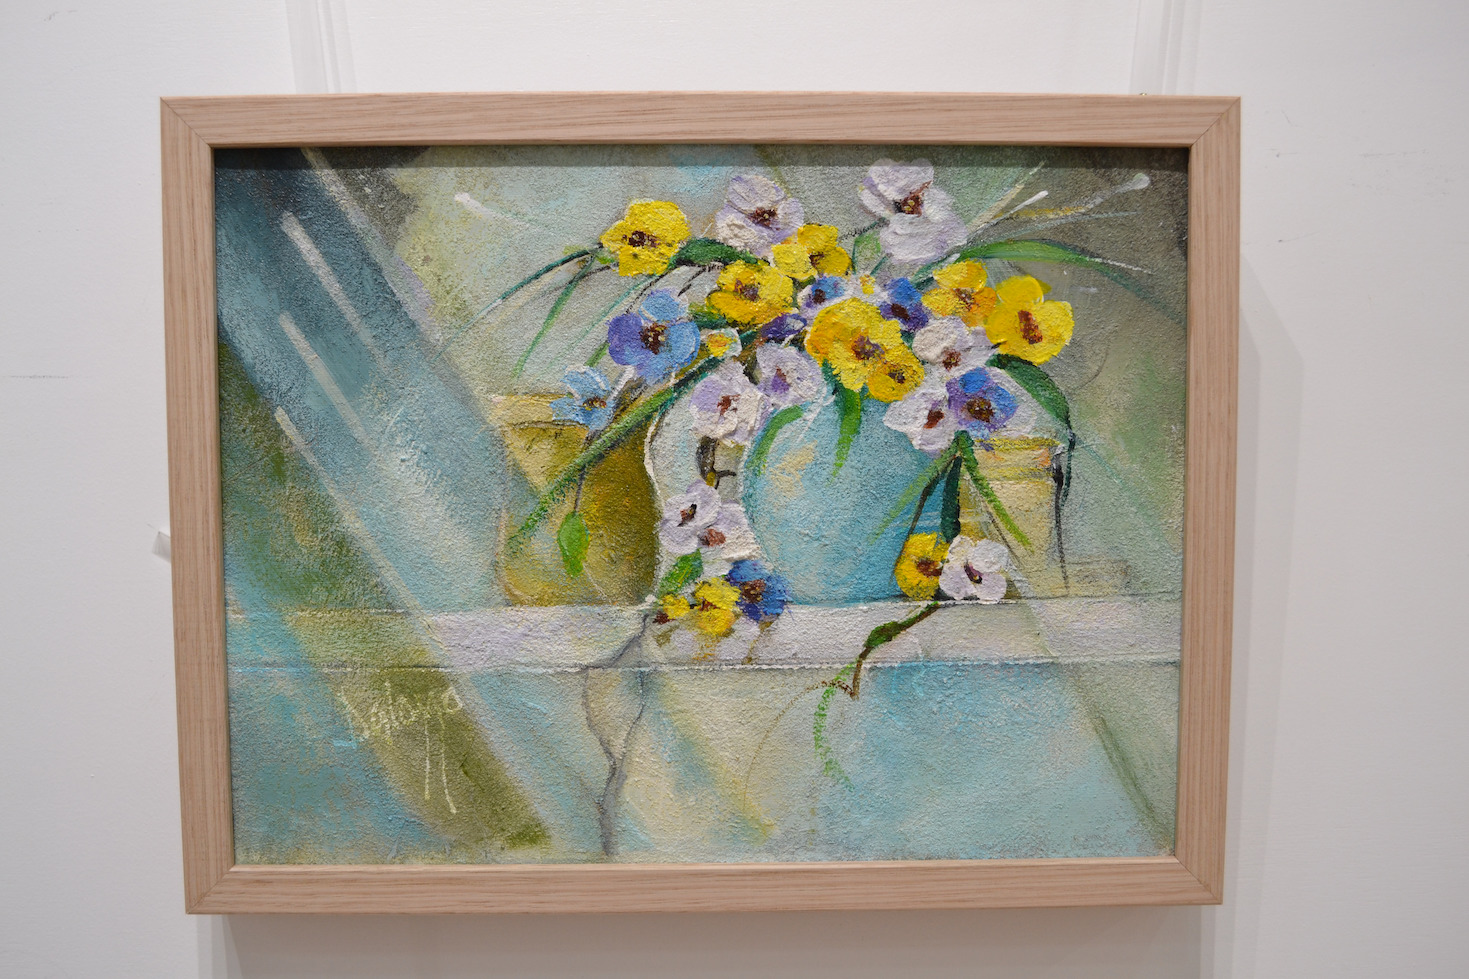 Framed Front View 2 Of Still Life Painting "Afternoon Sunlight" By Lucette Dalozzo